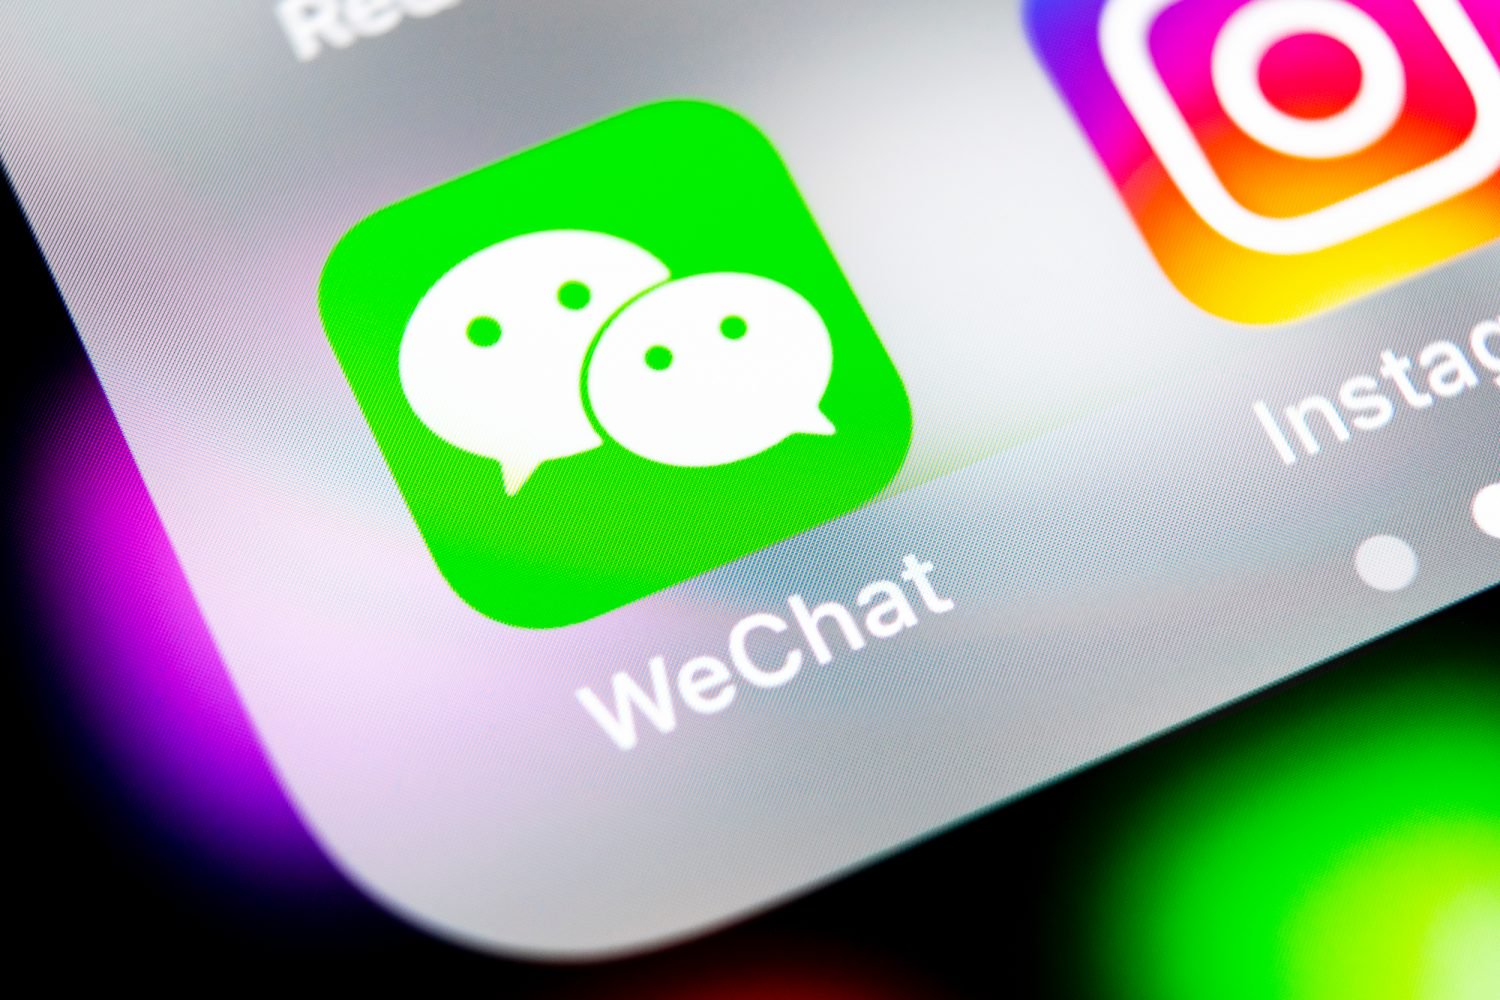 WeChat Now Censoring Bitmain And Crypto Price Prediction Accounts